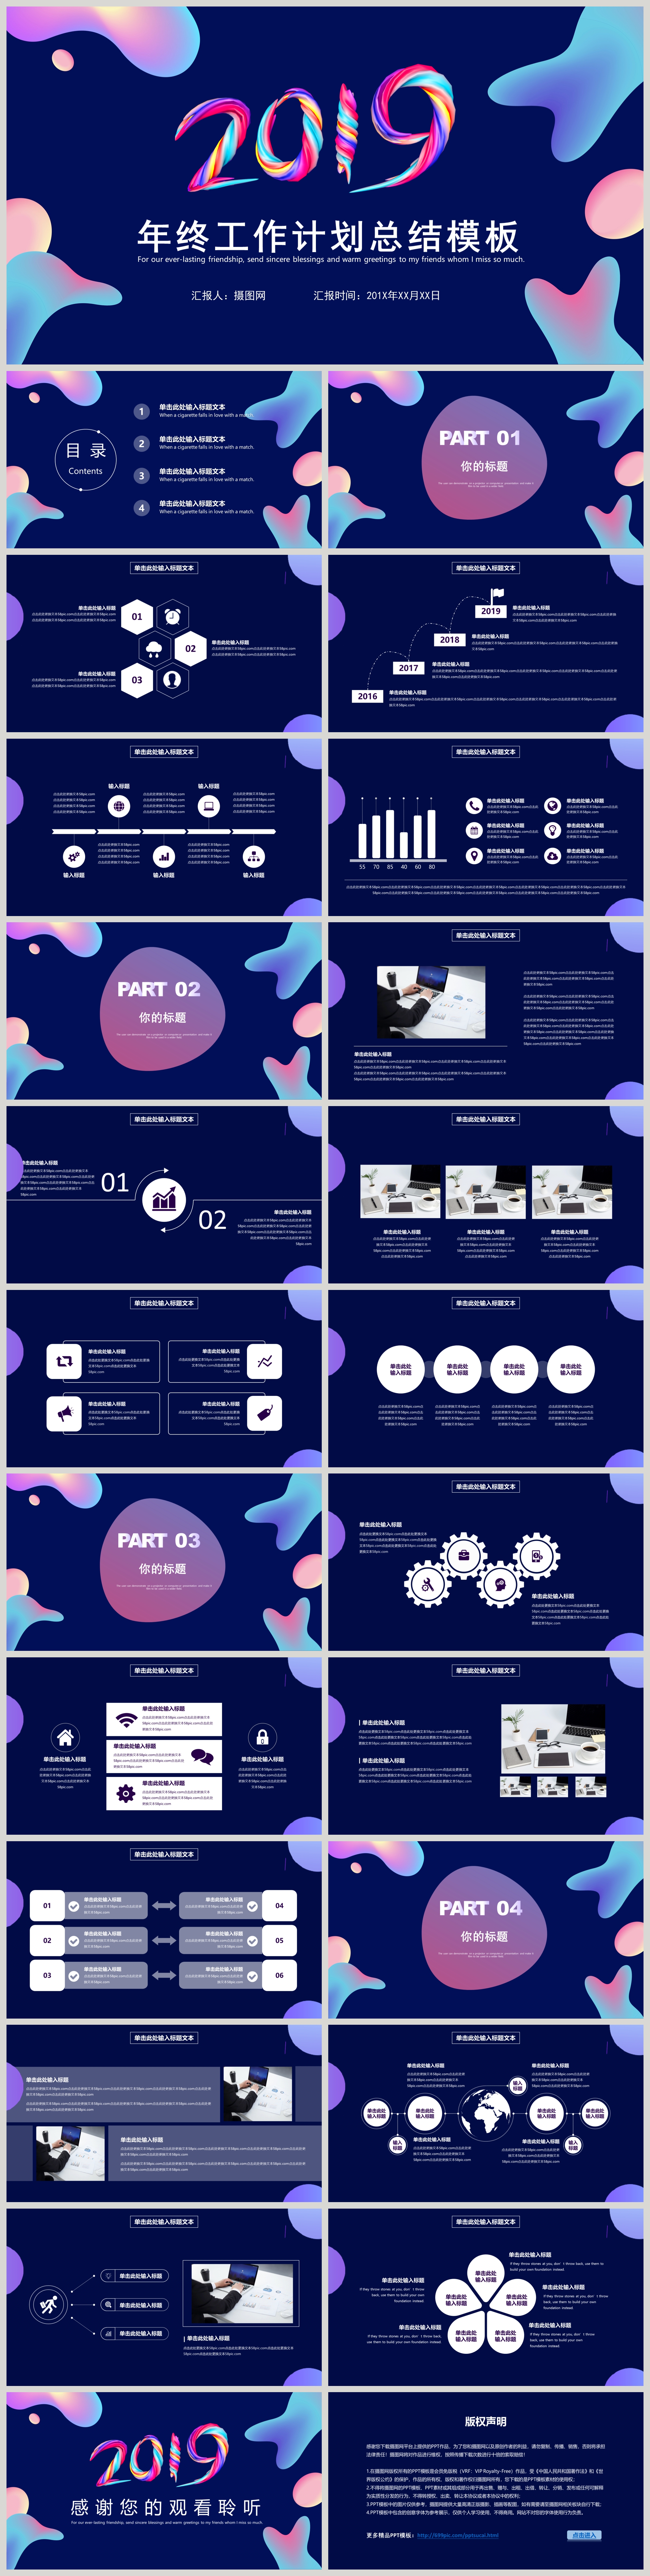 account-plan-template-ppt-free-download-resume-example-gallery